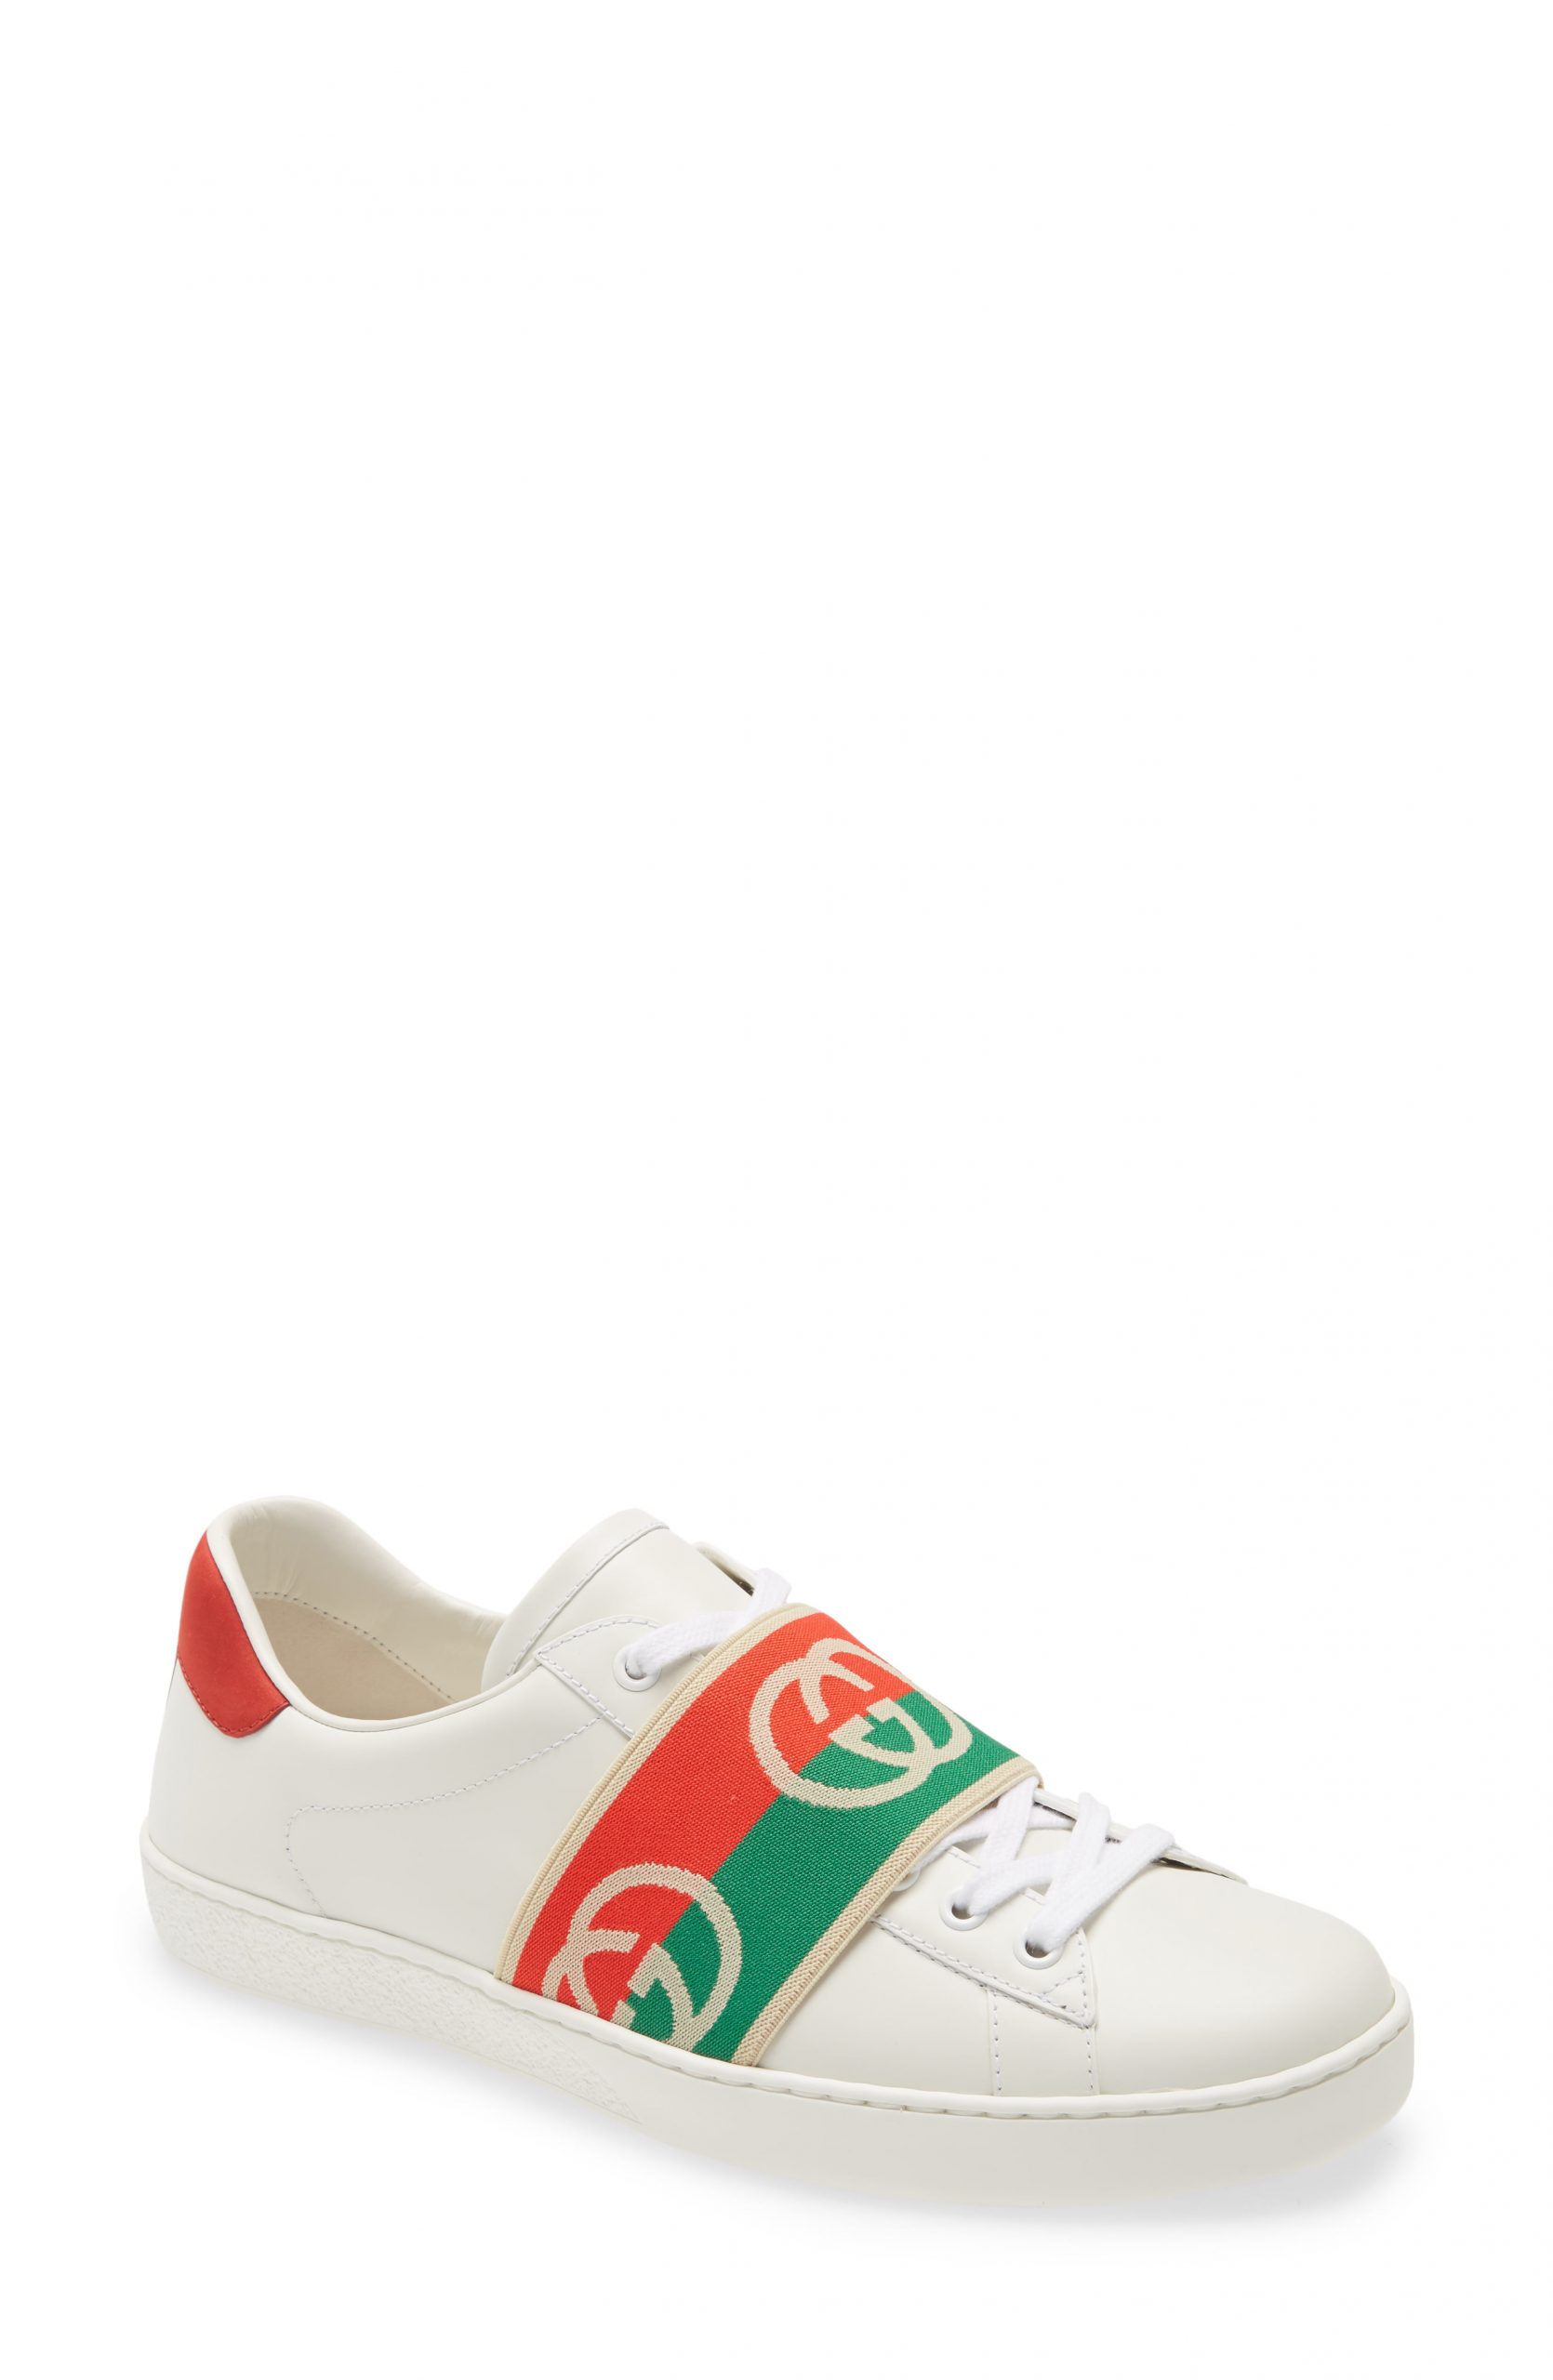 gucci ace logo sneakers